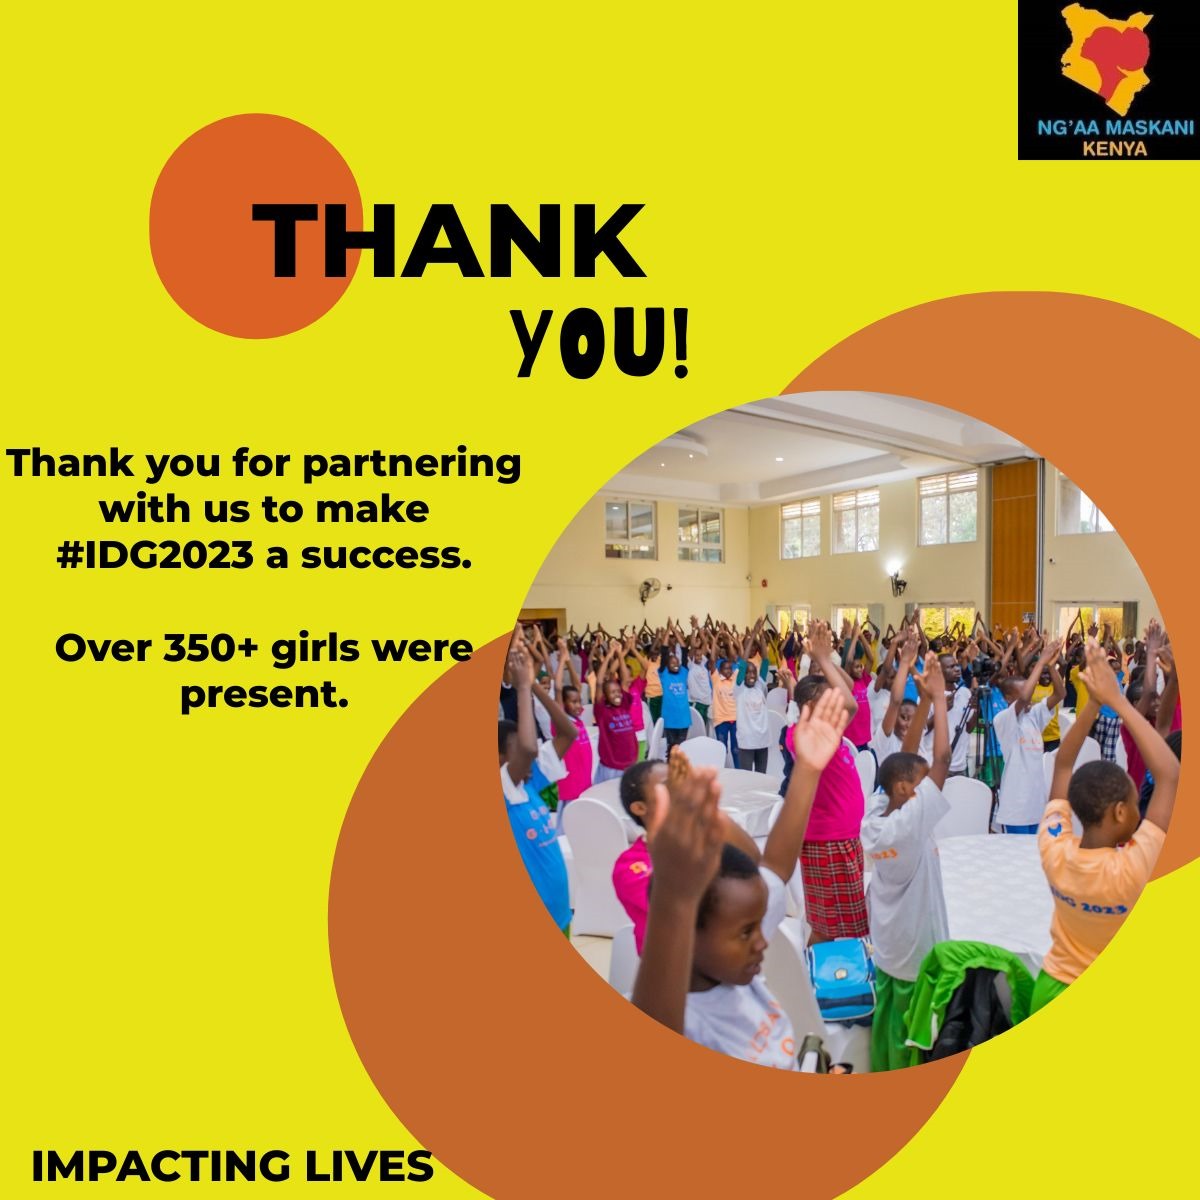 It was a big success with over 350 girls present at the event. Thank you for partnering to make #IDG2023 a success.
#NgaaMaskani